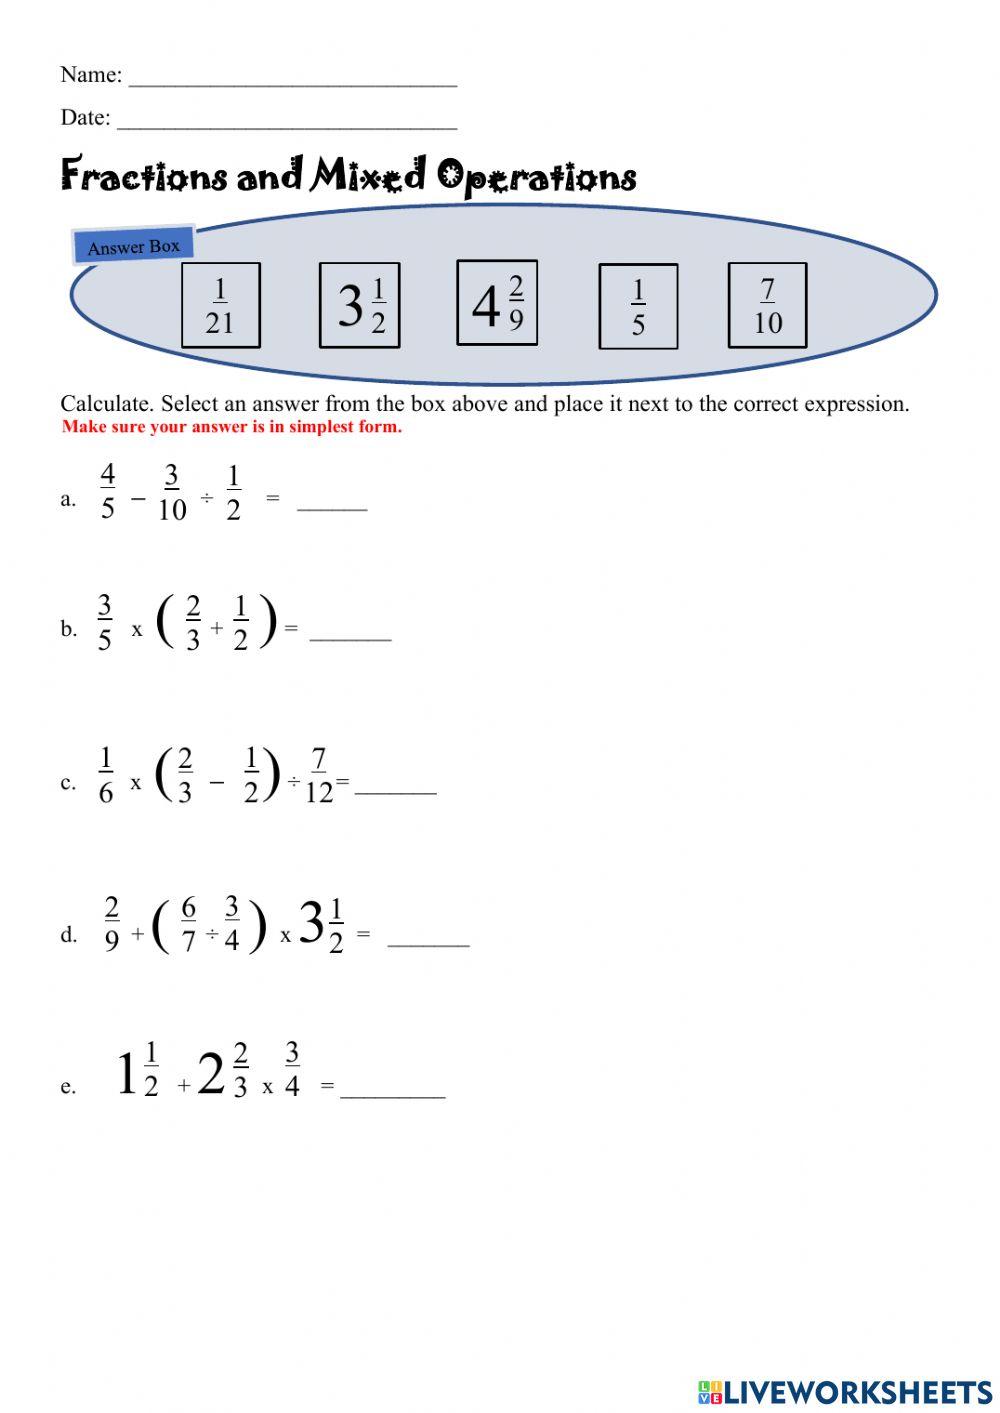 Fractions and Mixed Operations